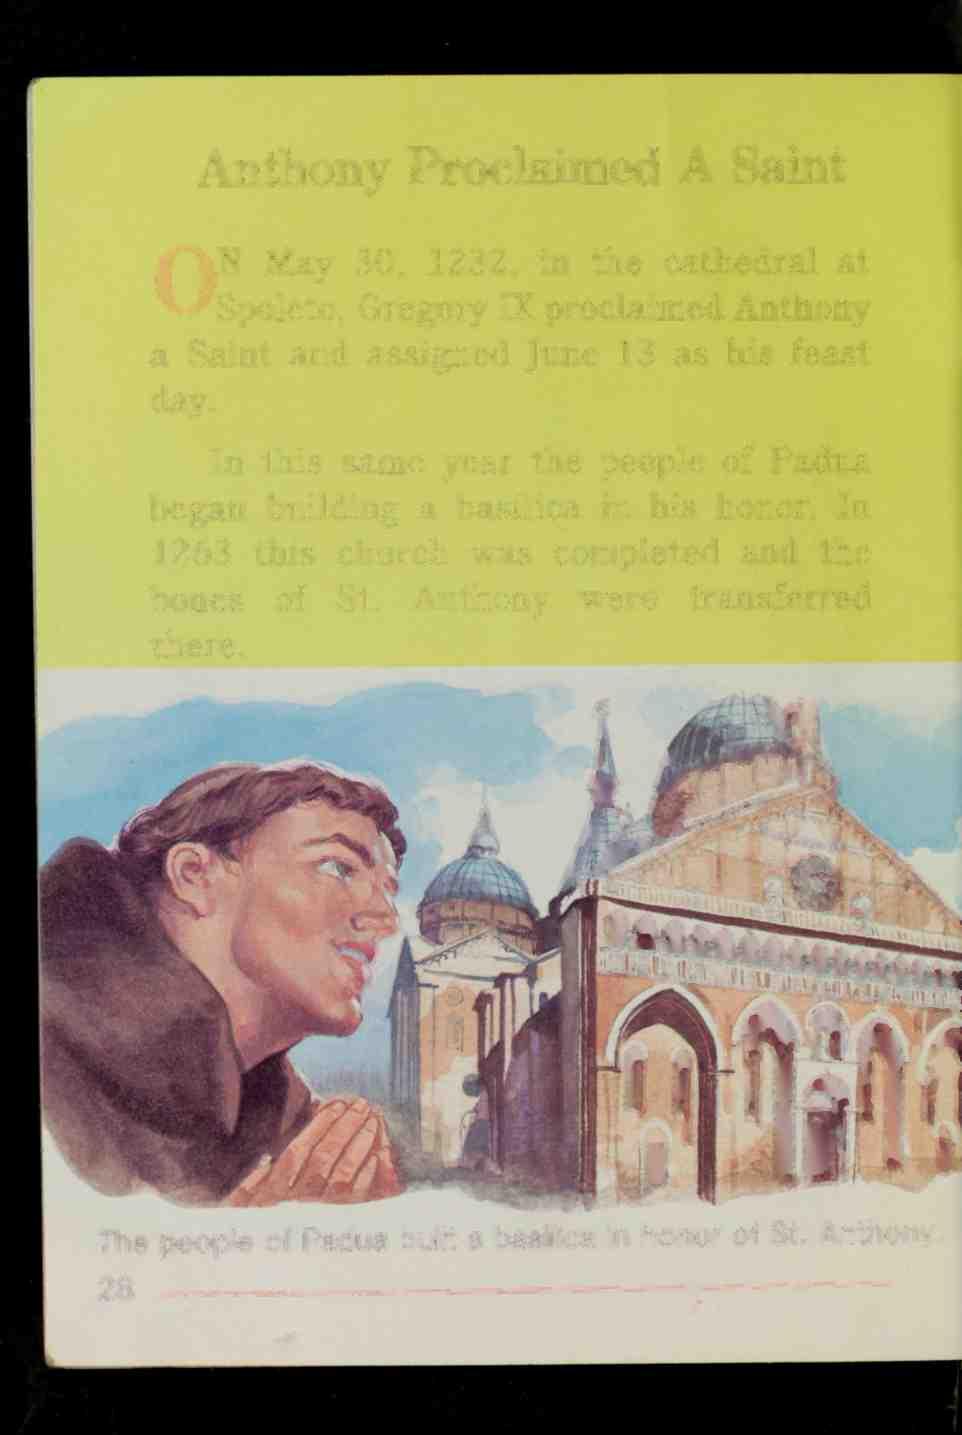 Anthony Proclaimed A Saint ON May 30, 1232, in the cathedral